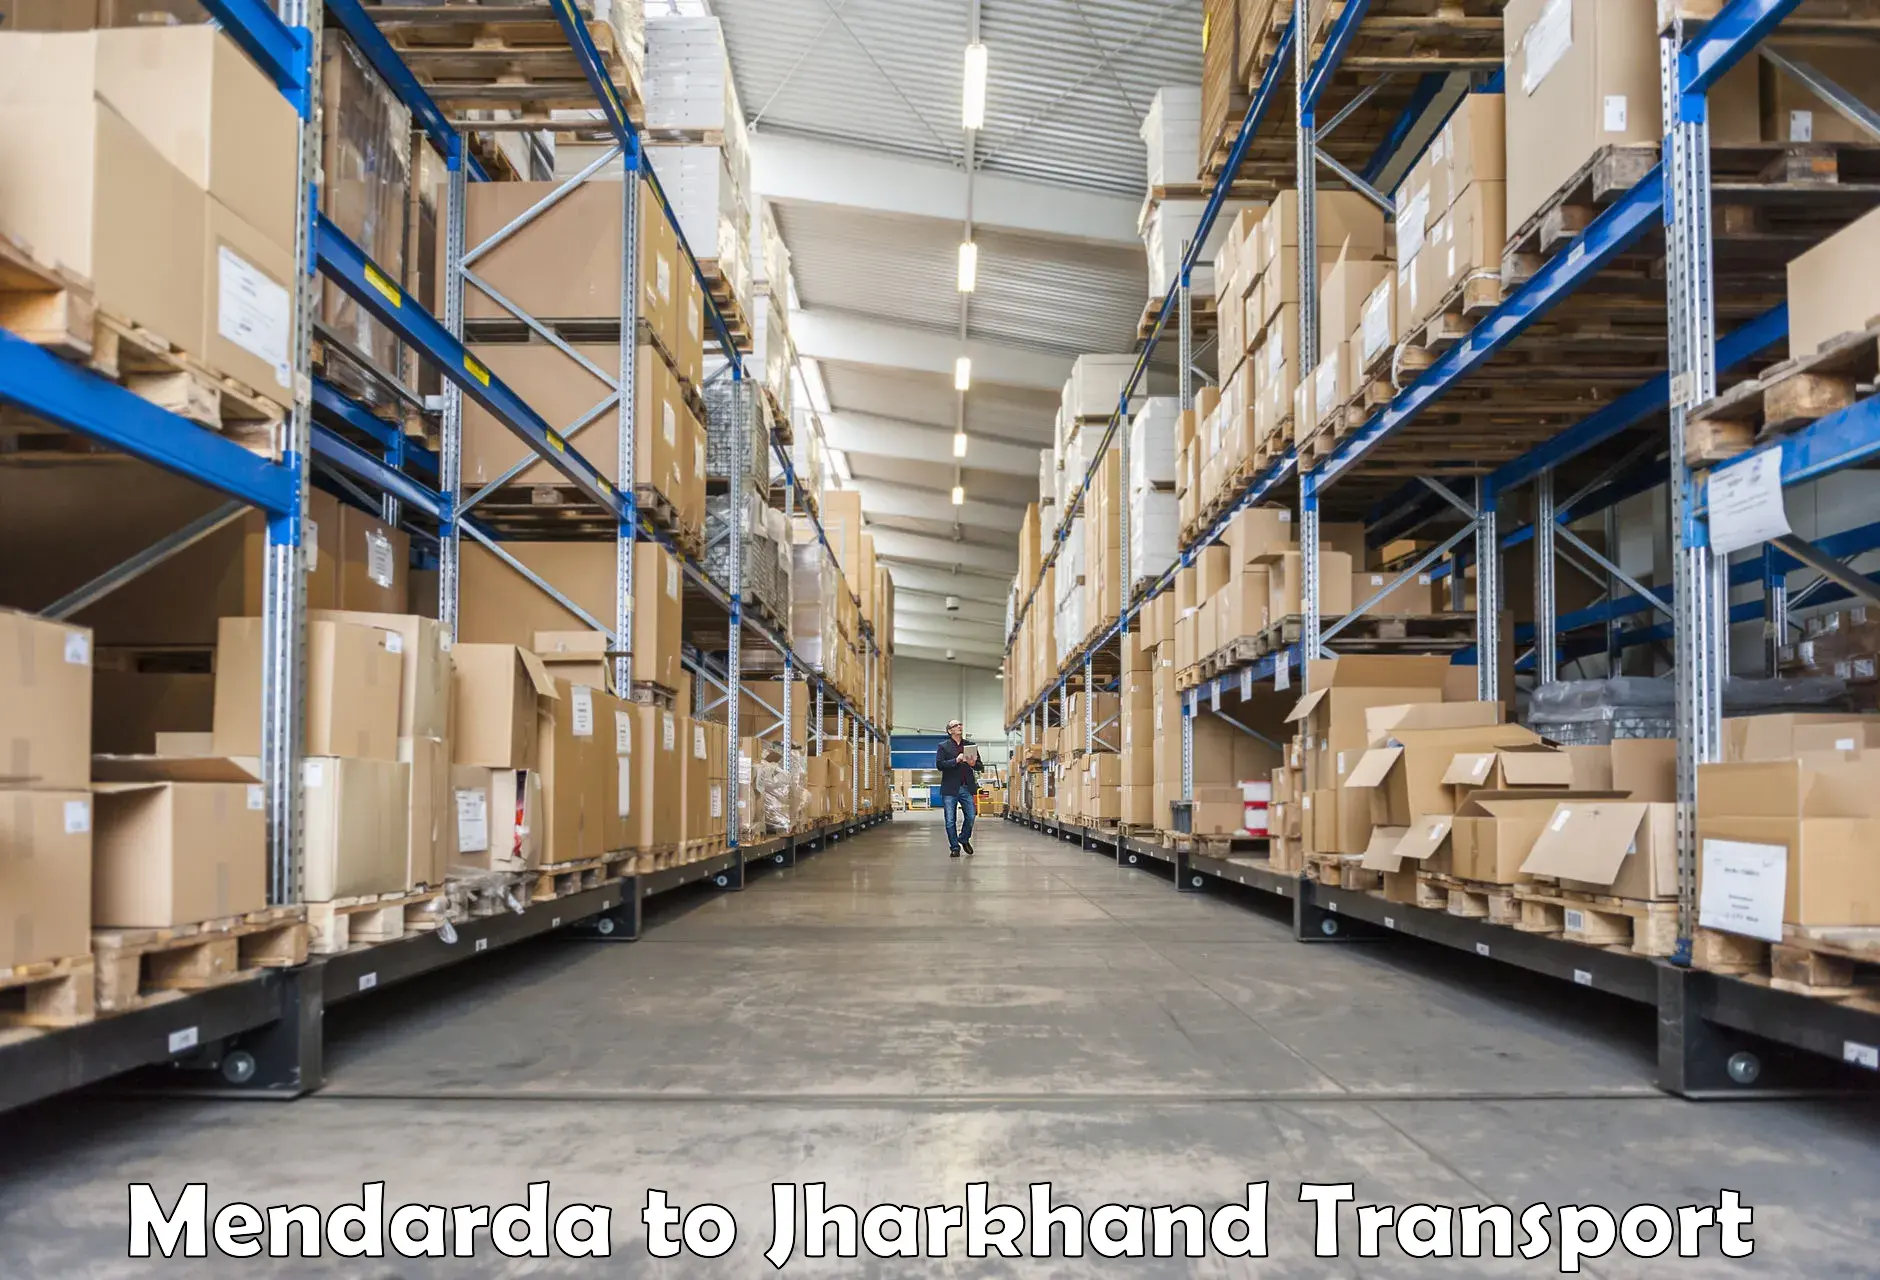 Air cargo transport services in Mendarda to Dhanbad